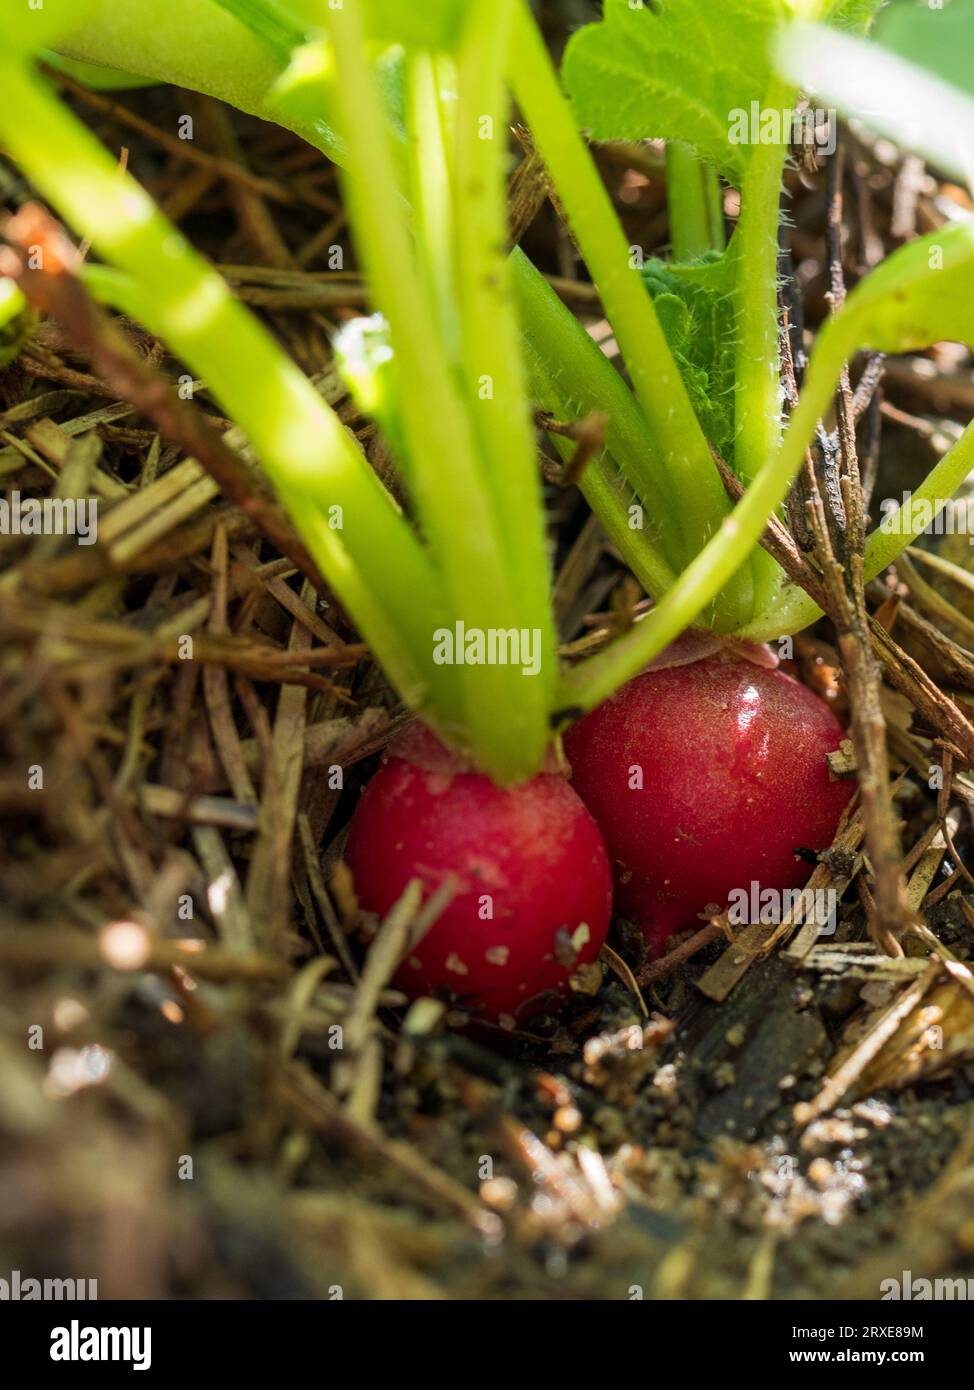 Two red Radishes with green tops being pulled from the dirt in the vegetable garden bed Stock Photo